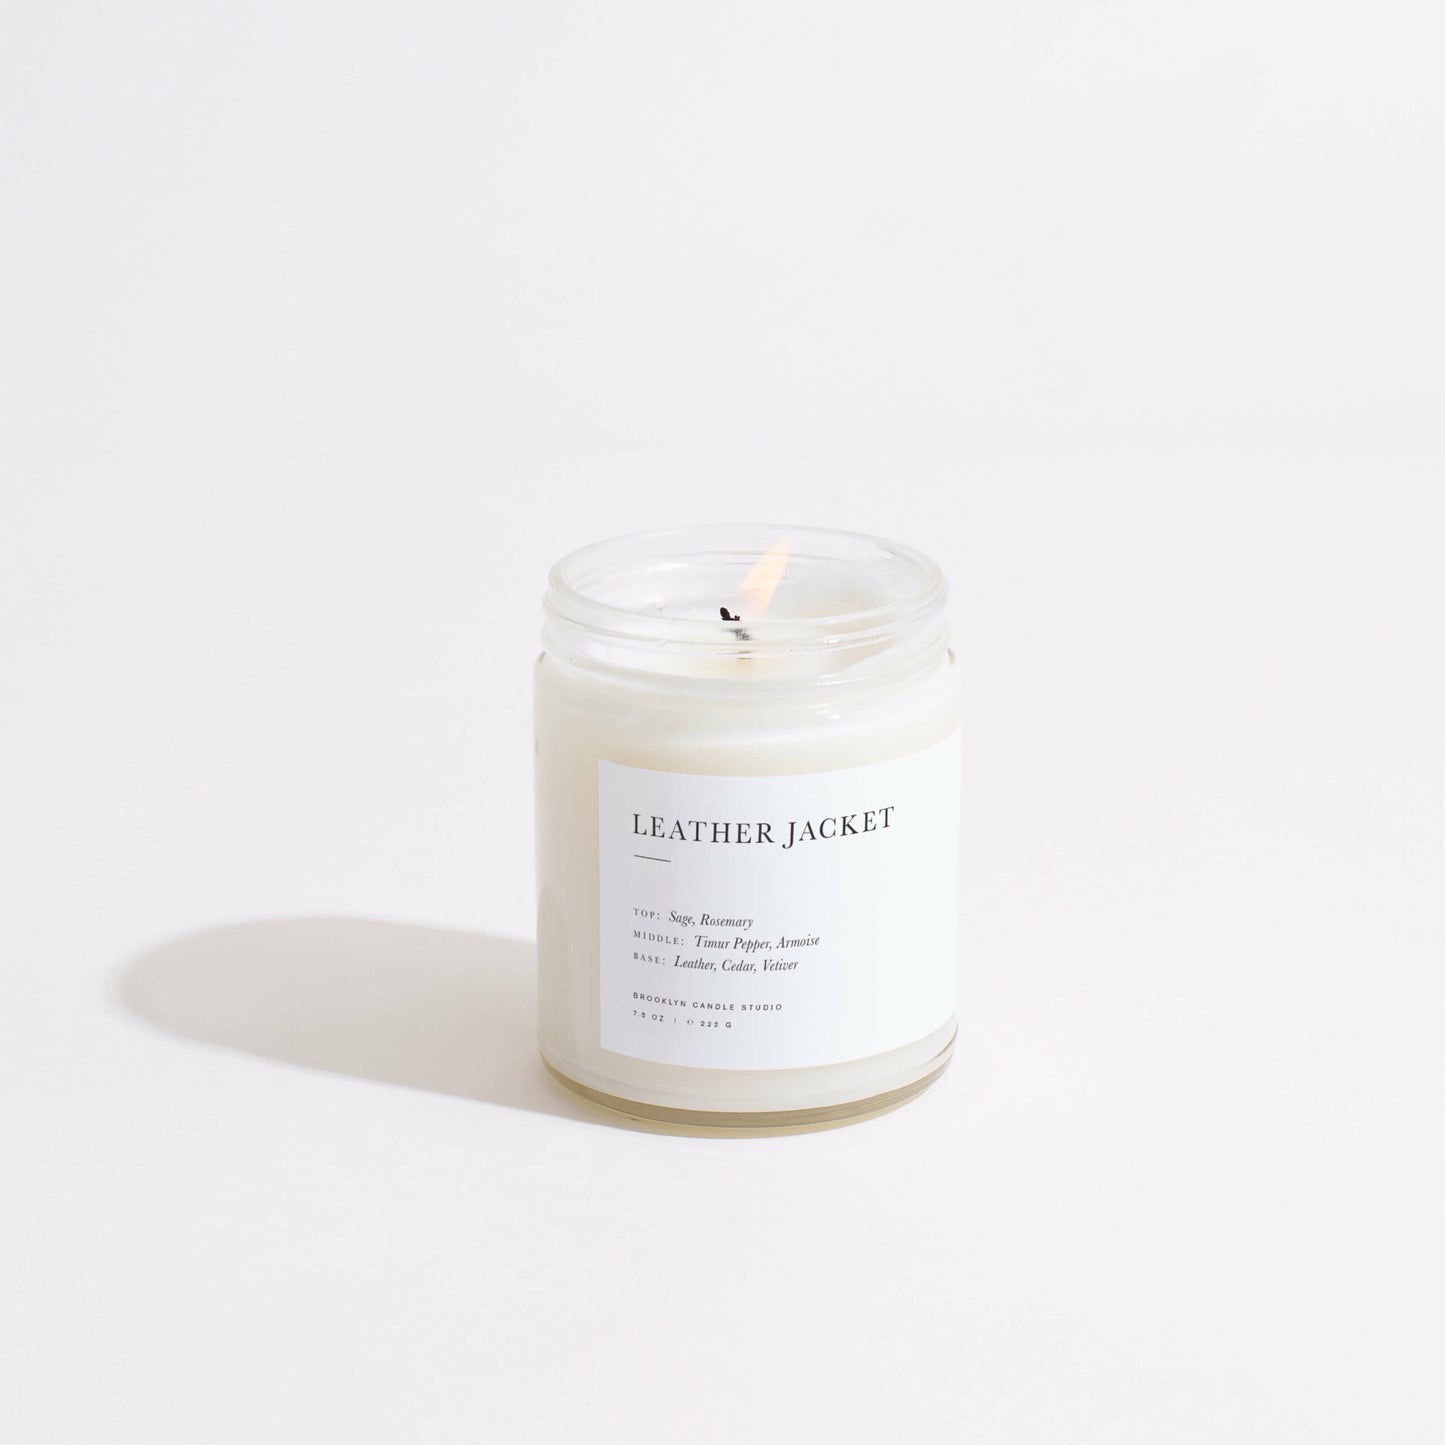 Leather Jacket Candle by Brooklyn Candle Studio